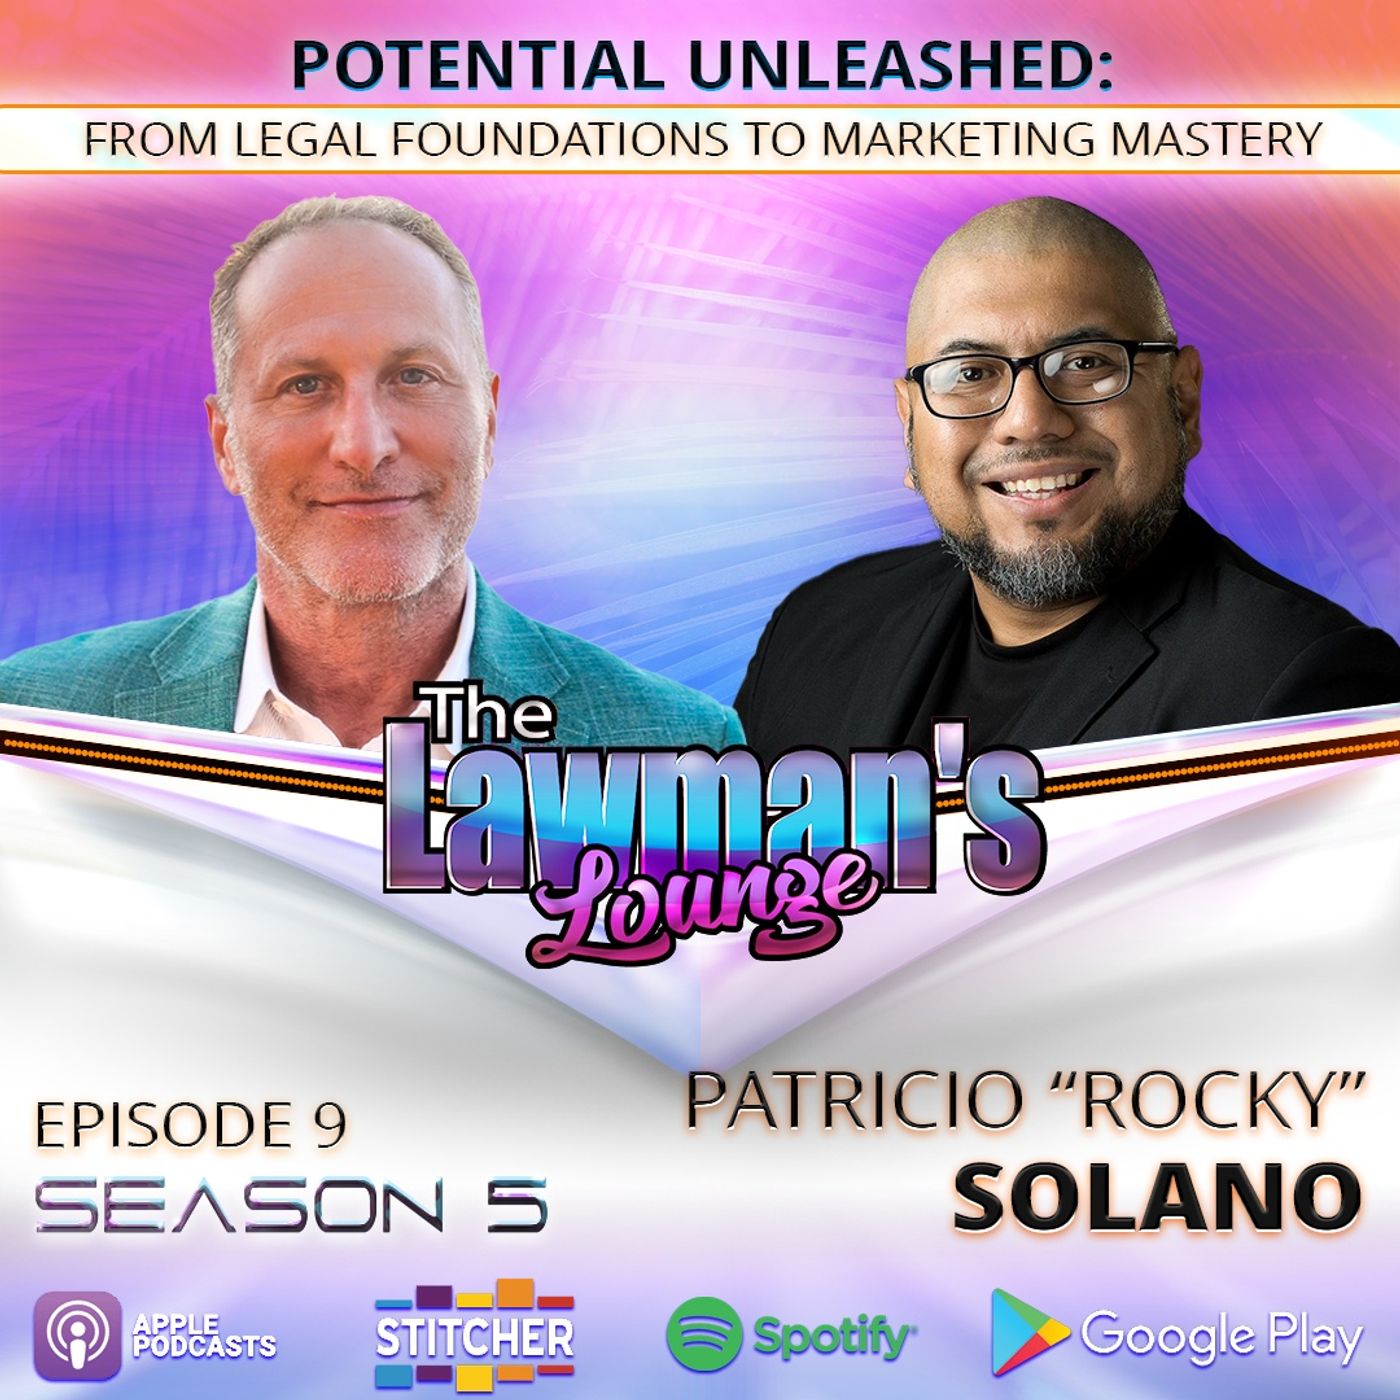 Potential Unleashed: From Legal Foundations to Marketing Masery with Patricio "Rocky" Solano